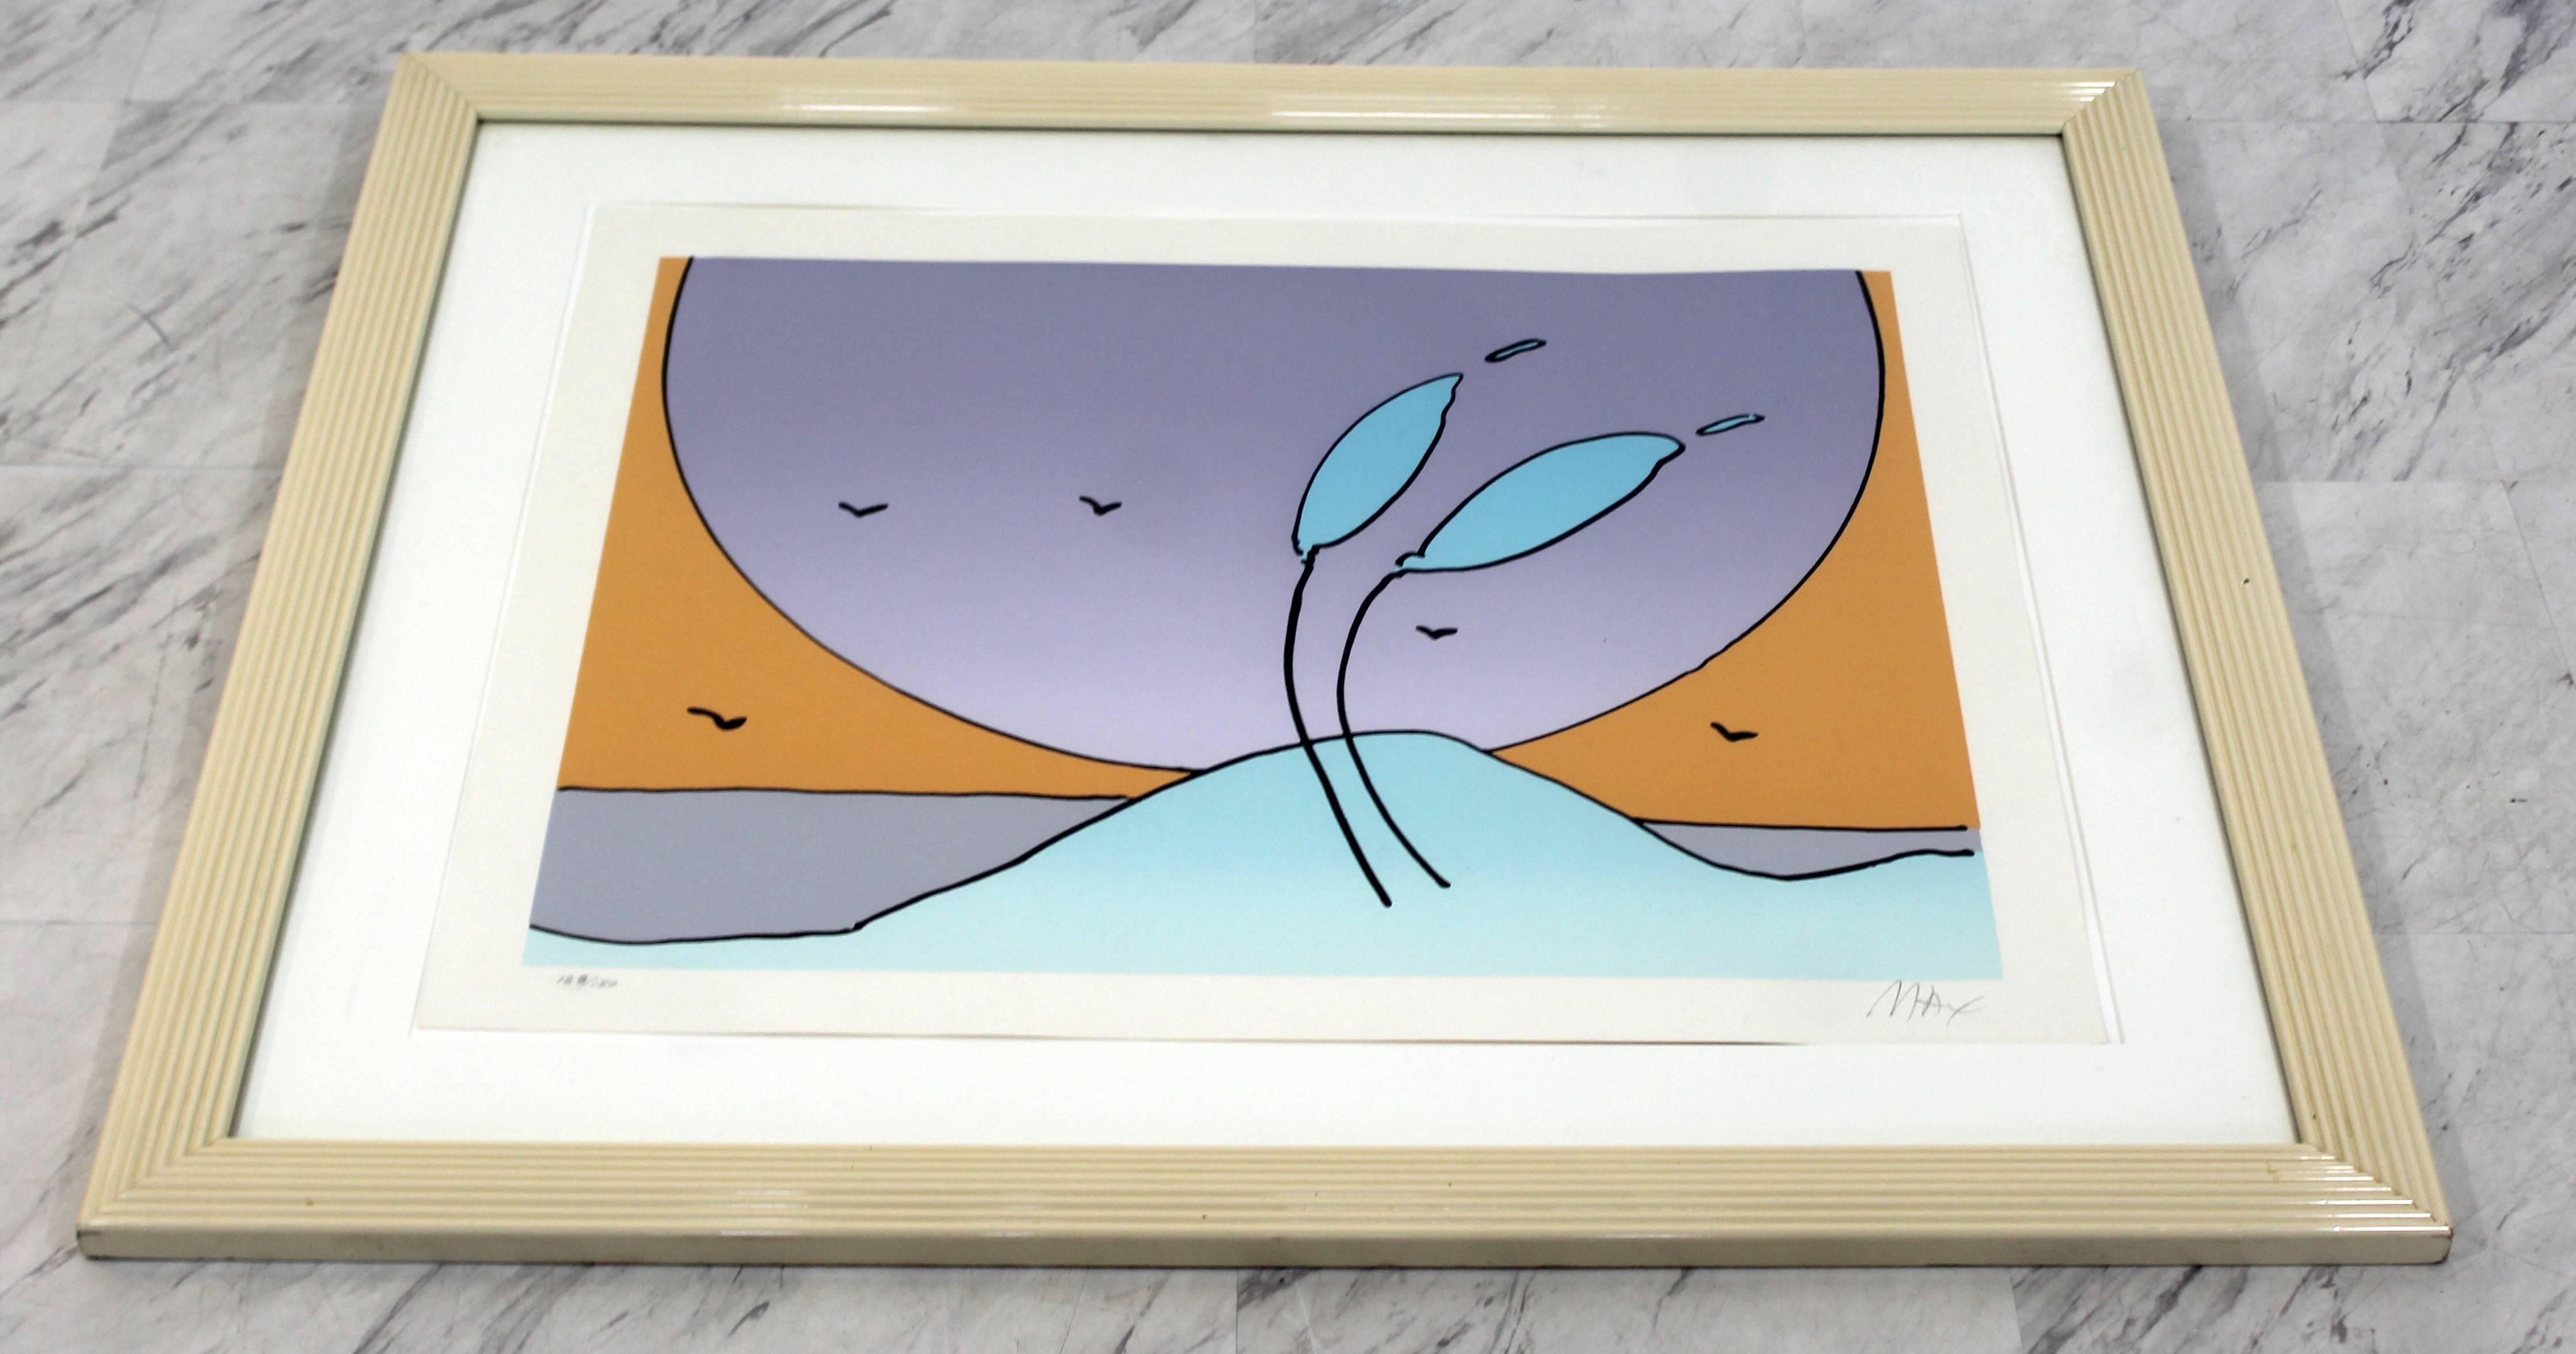 American Mid-Century Modern Framed Space Flowers by Peter Max Signed and Numbered